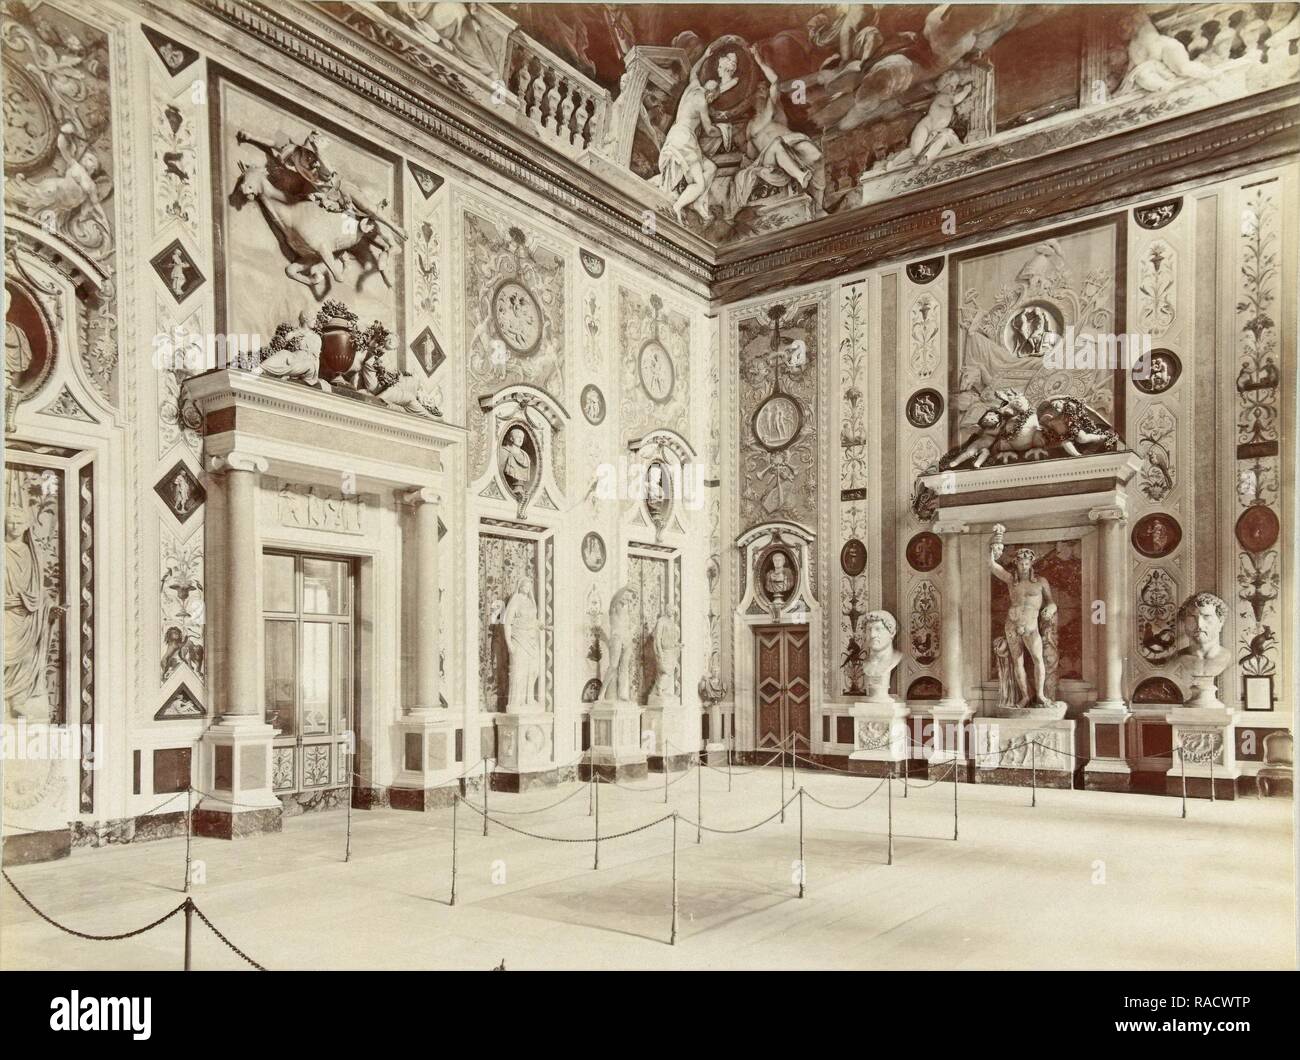 Interior of the Villa Borghese, Fratelli Alinari, c. 1880 - c. 189. Reimagined by Gibon. Classic art with a modern reimagined Stock Photo